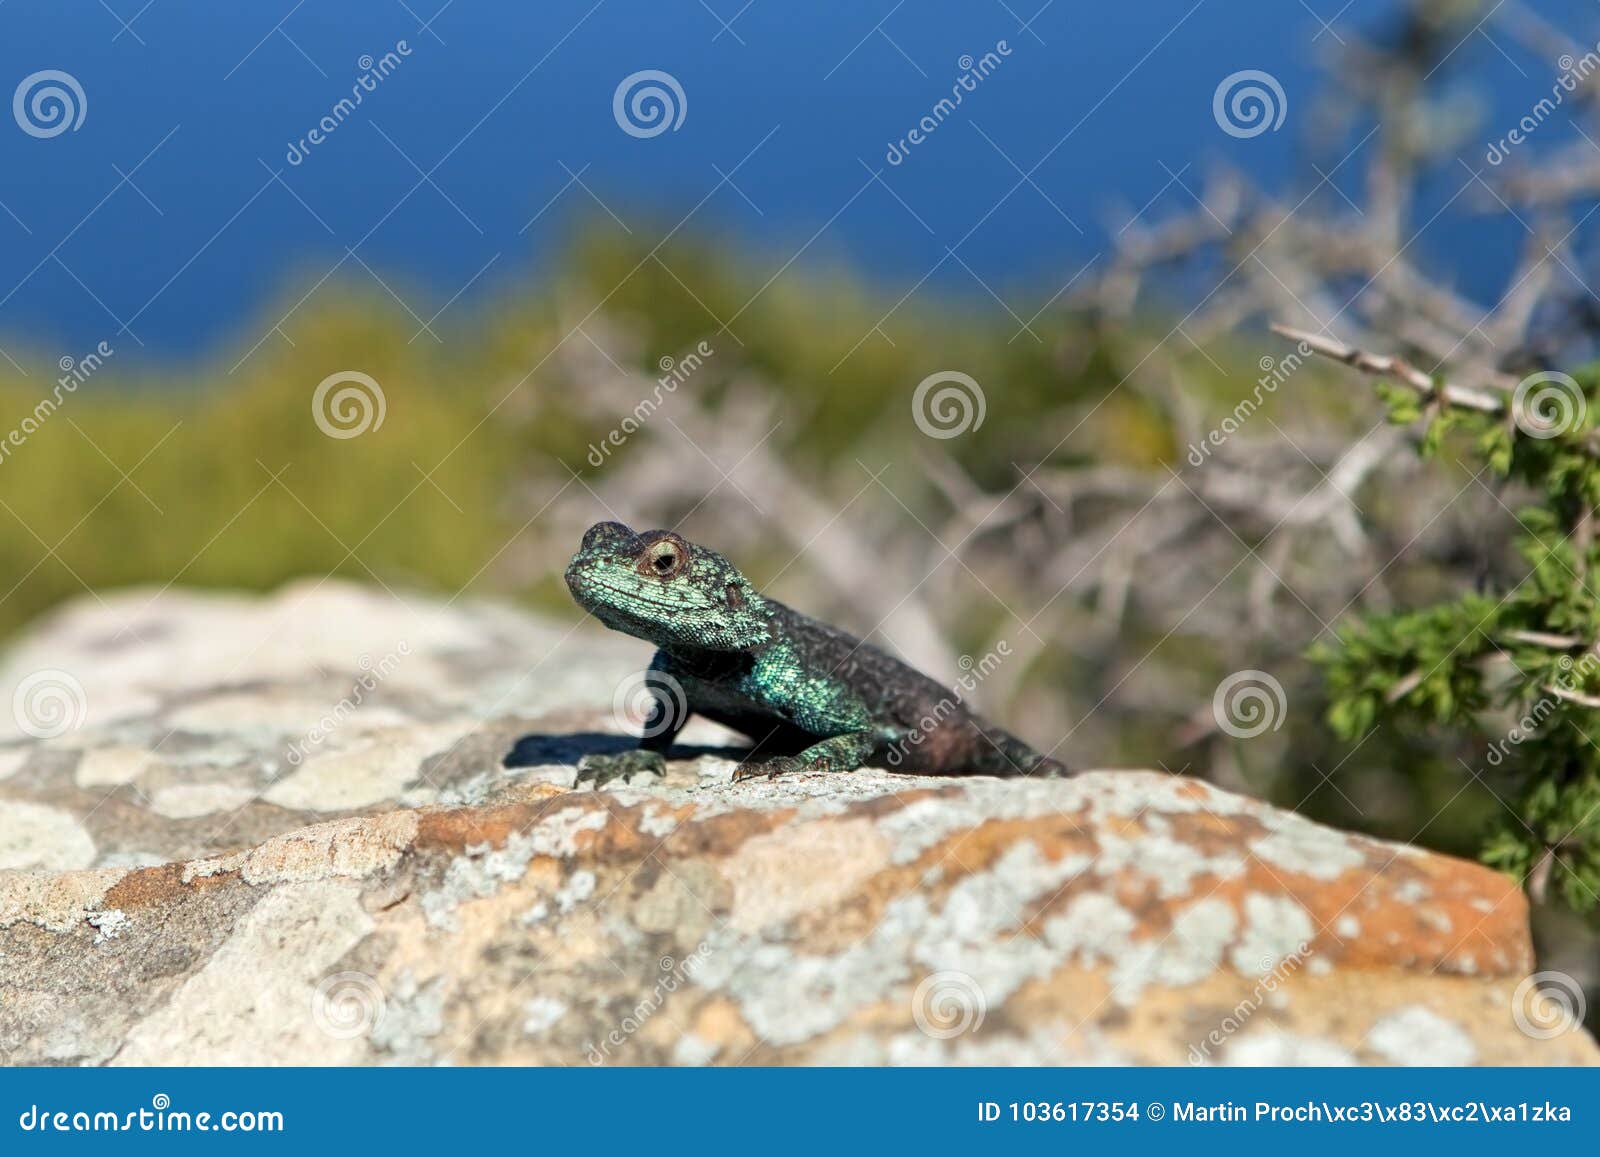 Agama, South Africa stock photo. Image of good, lizard - 103617354